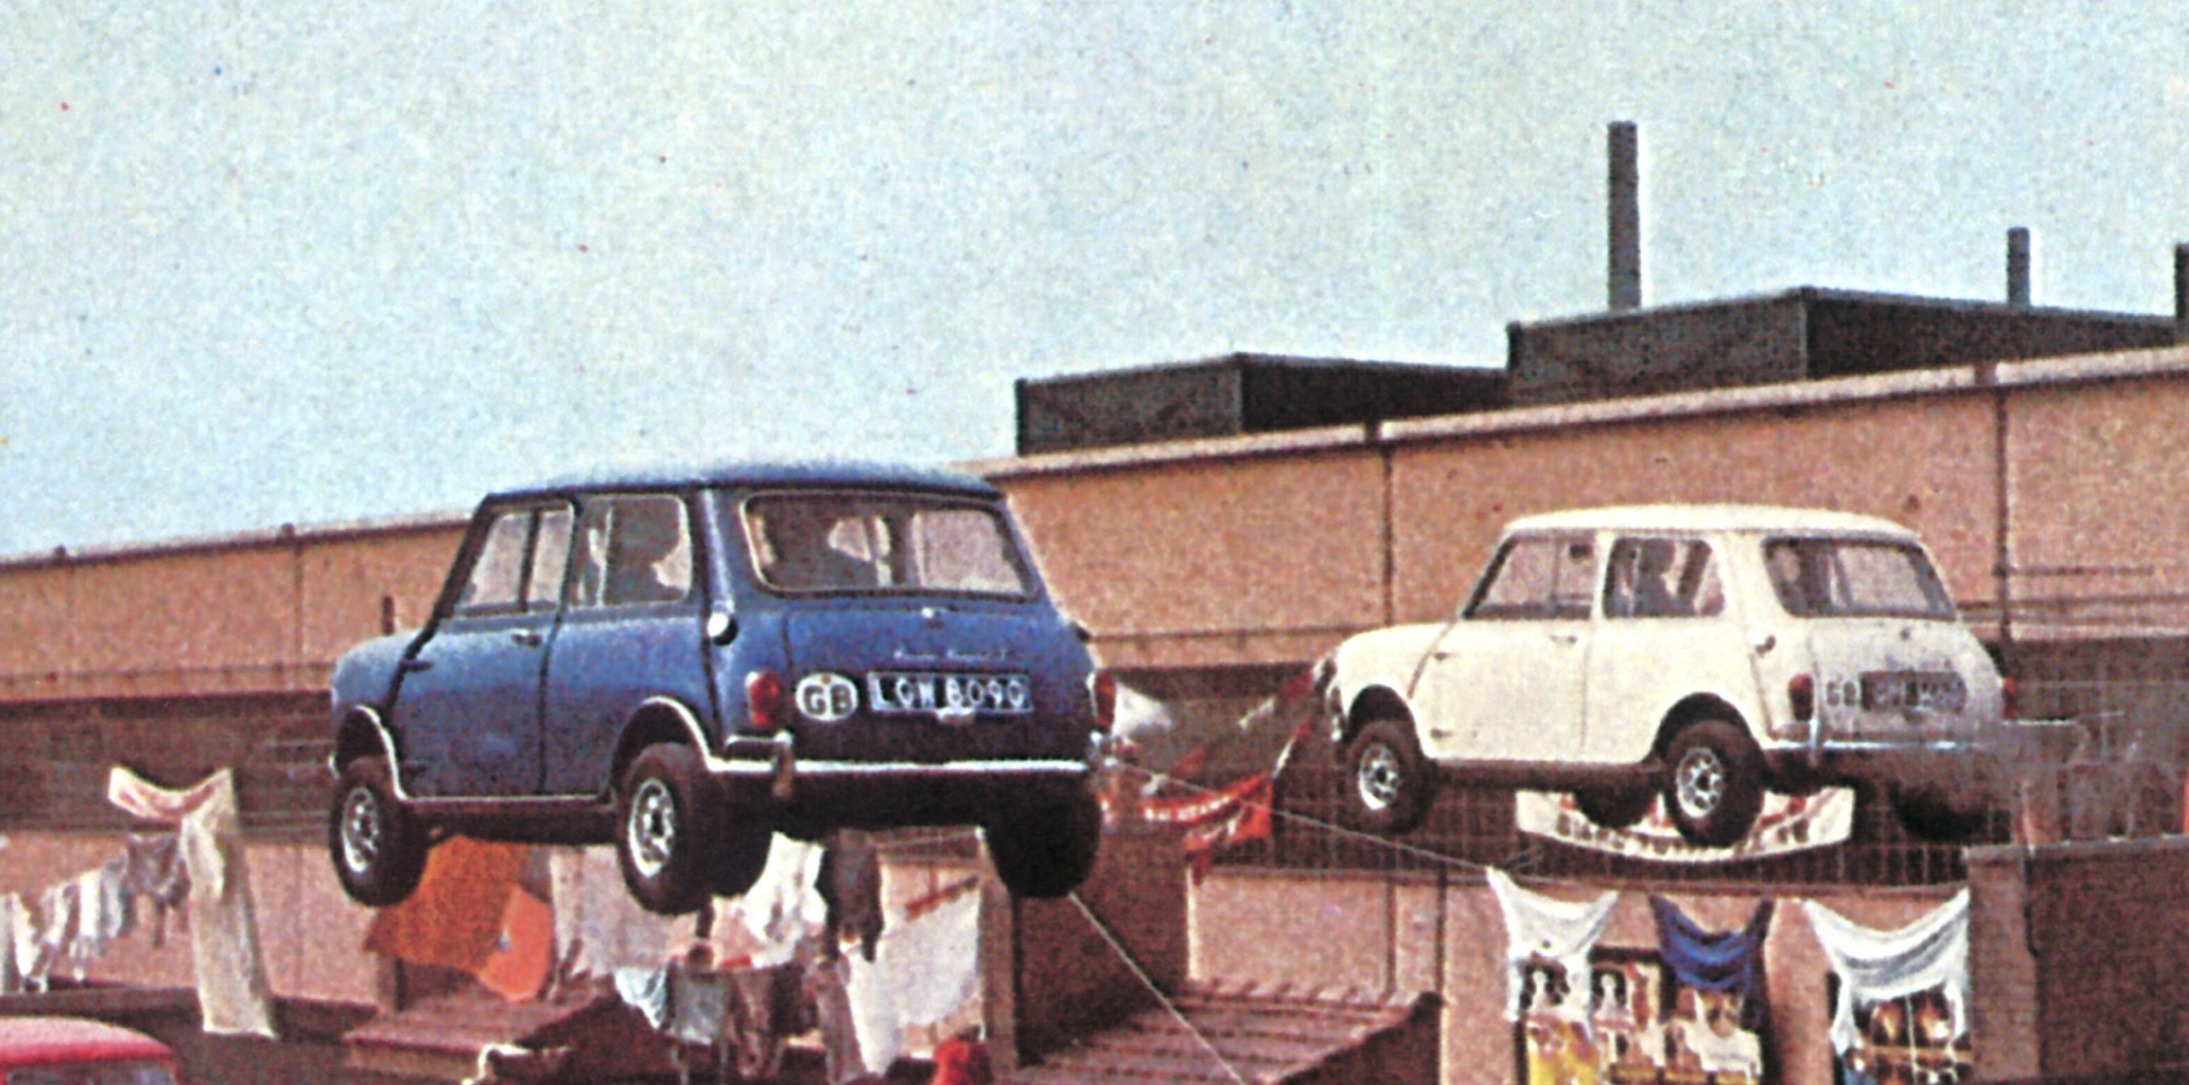 <p>The Minis in the 2003 remake are great, but they don't compare close to the models from the 1969 film. The British Motor Corporation refused to donate any cars to the film, selling the production crew six Minis at trade price. </p> <p>Since the company was uncooperative, screenwriter Troy Kennedy Martin refused to trade out vehicles for one of the world's most-famous chase scenes. The head of Fiat, Gianni Agnelli, was excited about the film, as he offered to donate all the cars they need in place of the Minis. The red, white, and blue getaway cars feature a four-cylinder, 75-hp engine, with a top speed of 97 mph.</p>